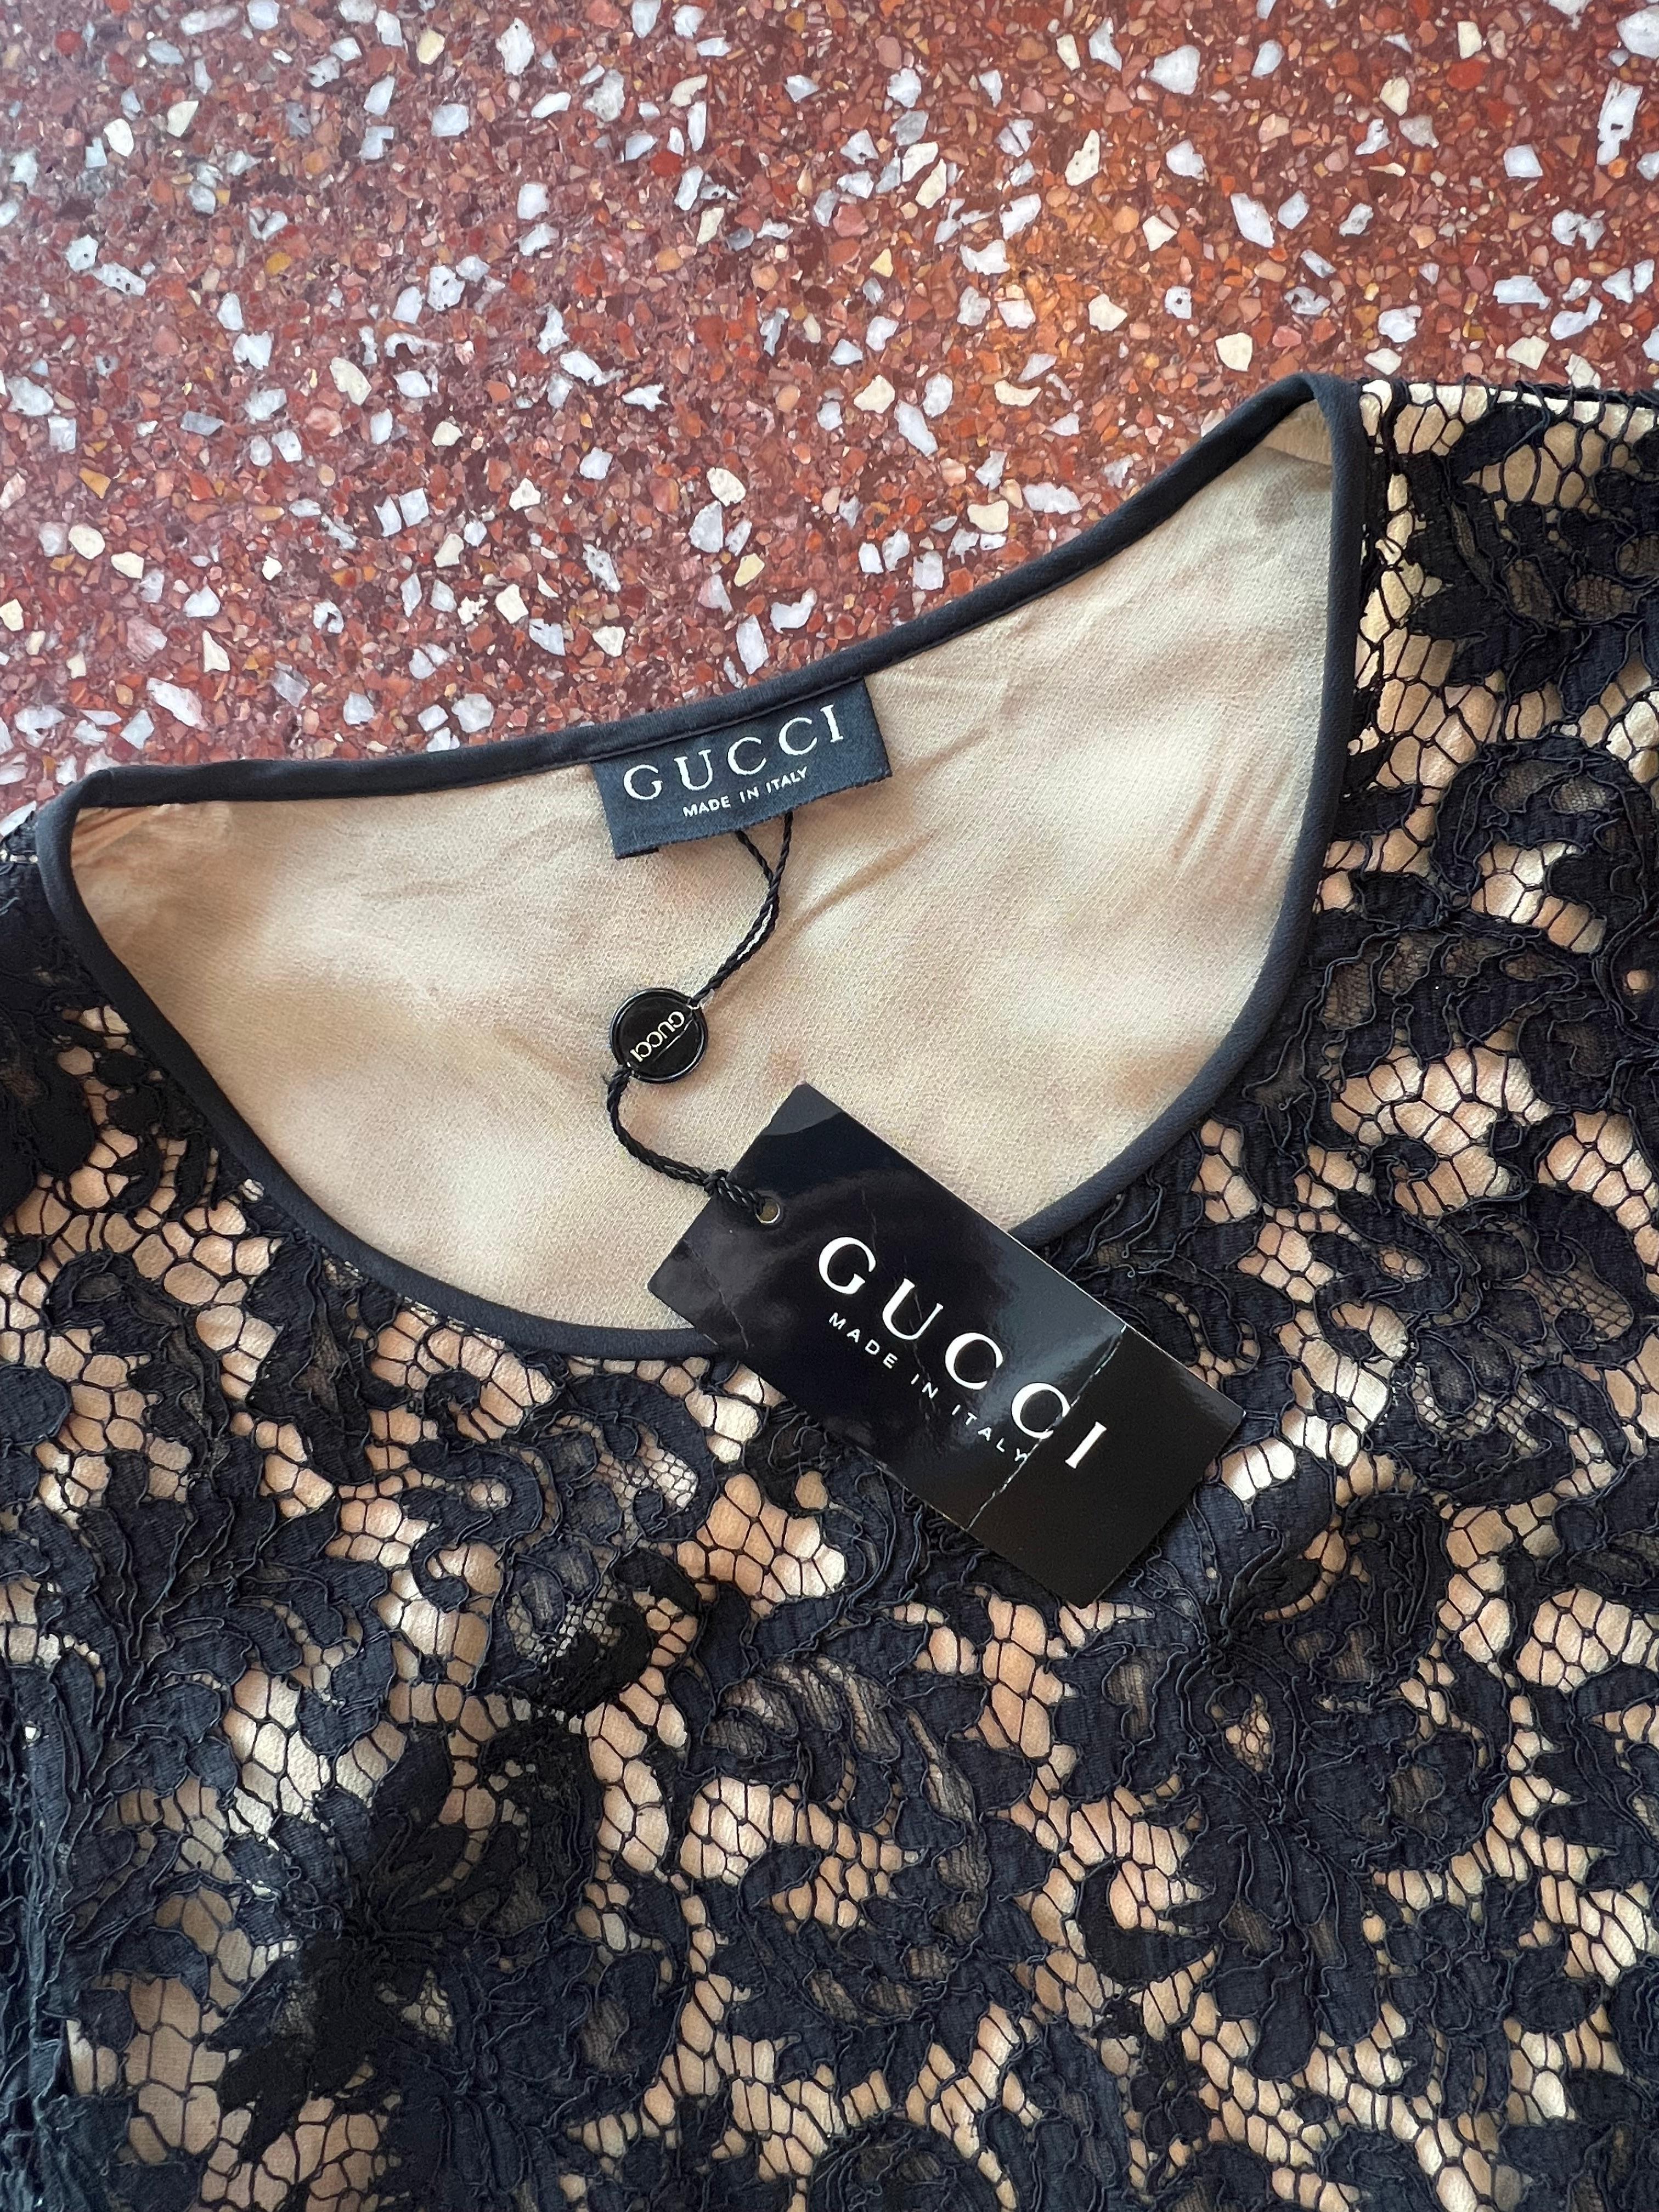 Resurrection Vintage is excited to offer a stunning vintage Tom Ford for Gucci black lace mini-dress featuring balloon sleeves with wrist ties, attached nude under slip, and scalloped edges. It was featured on the 1996 runway and in numerous fashion